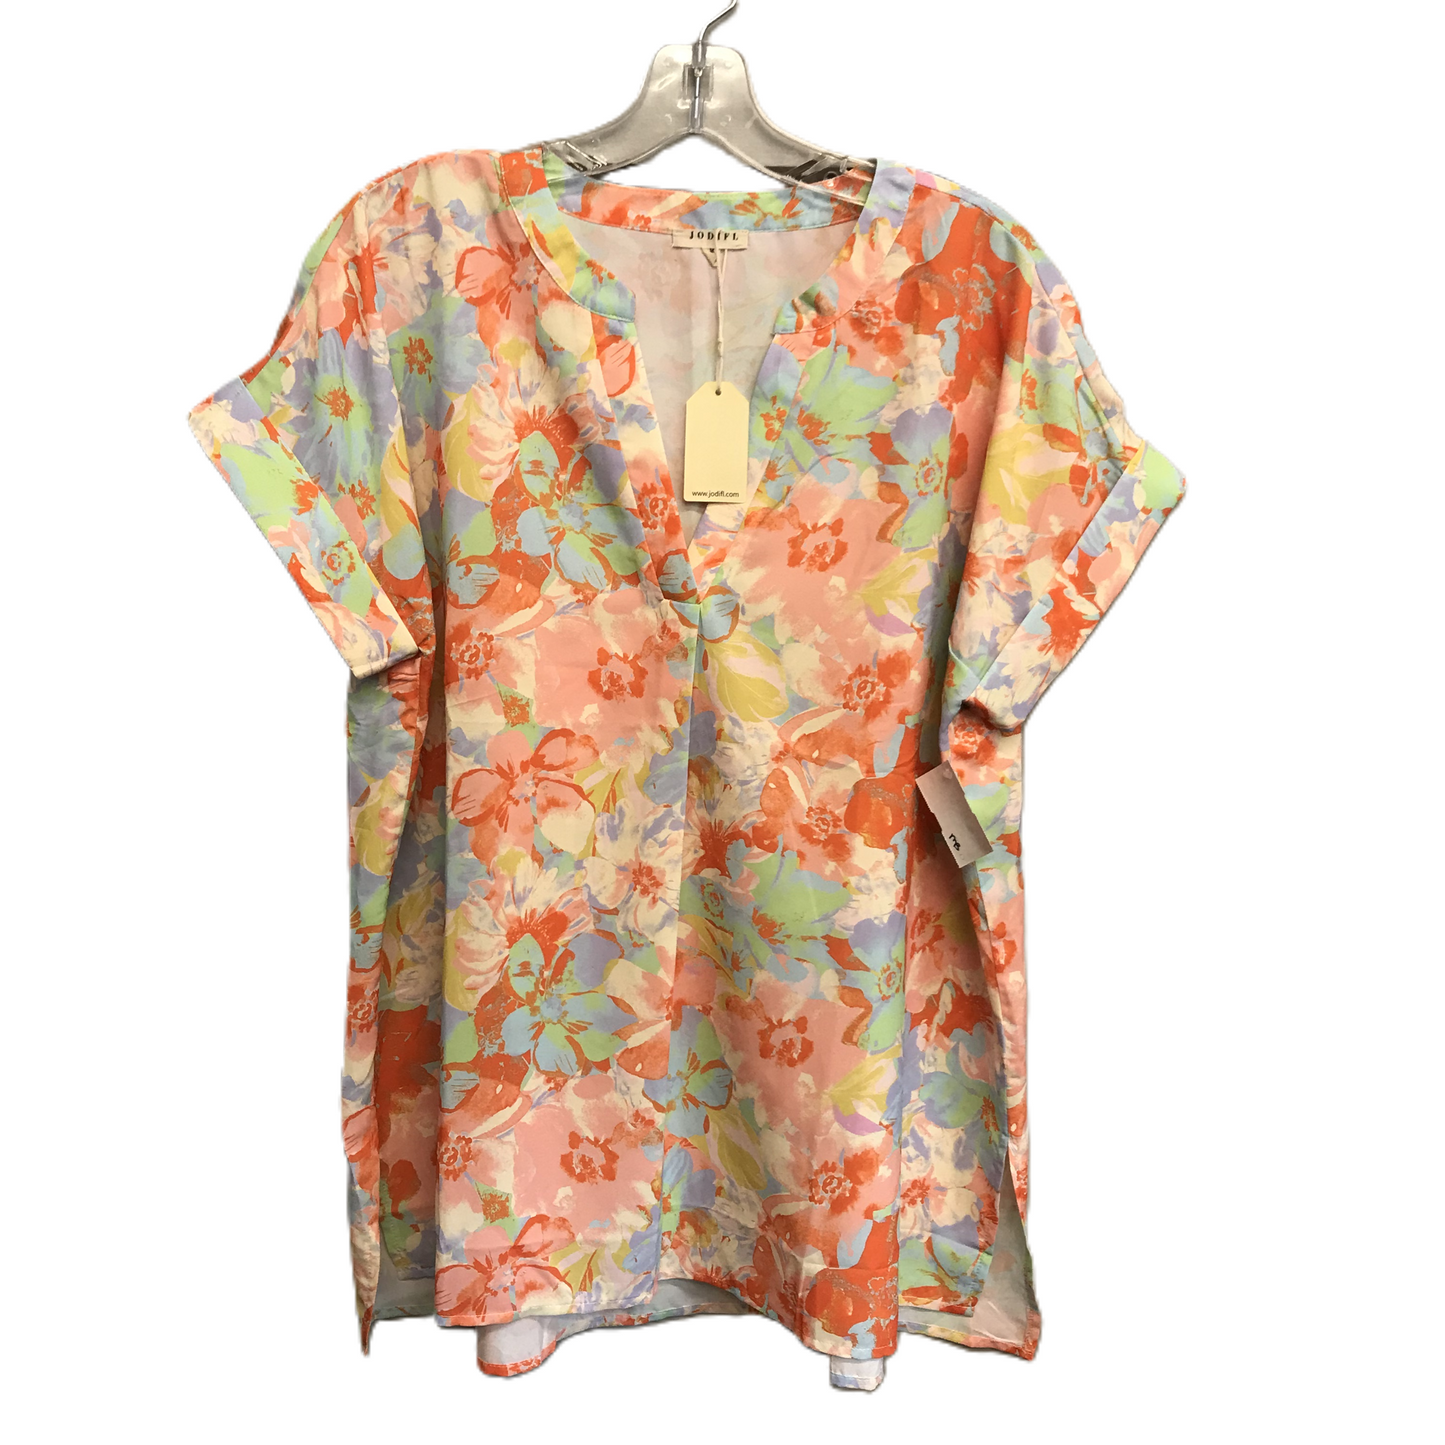 Floral Print Top Short Sleeve By Jodifl, Size: M